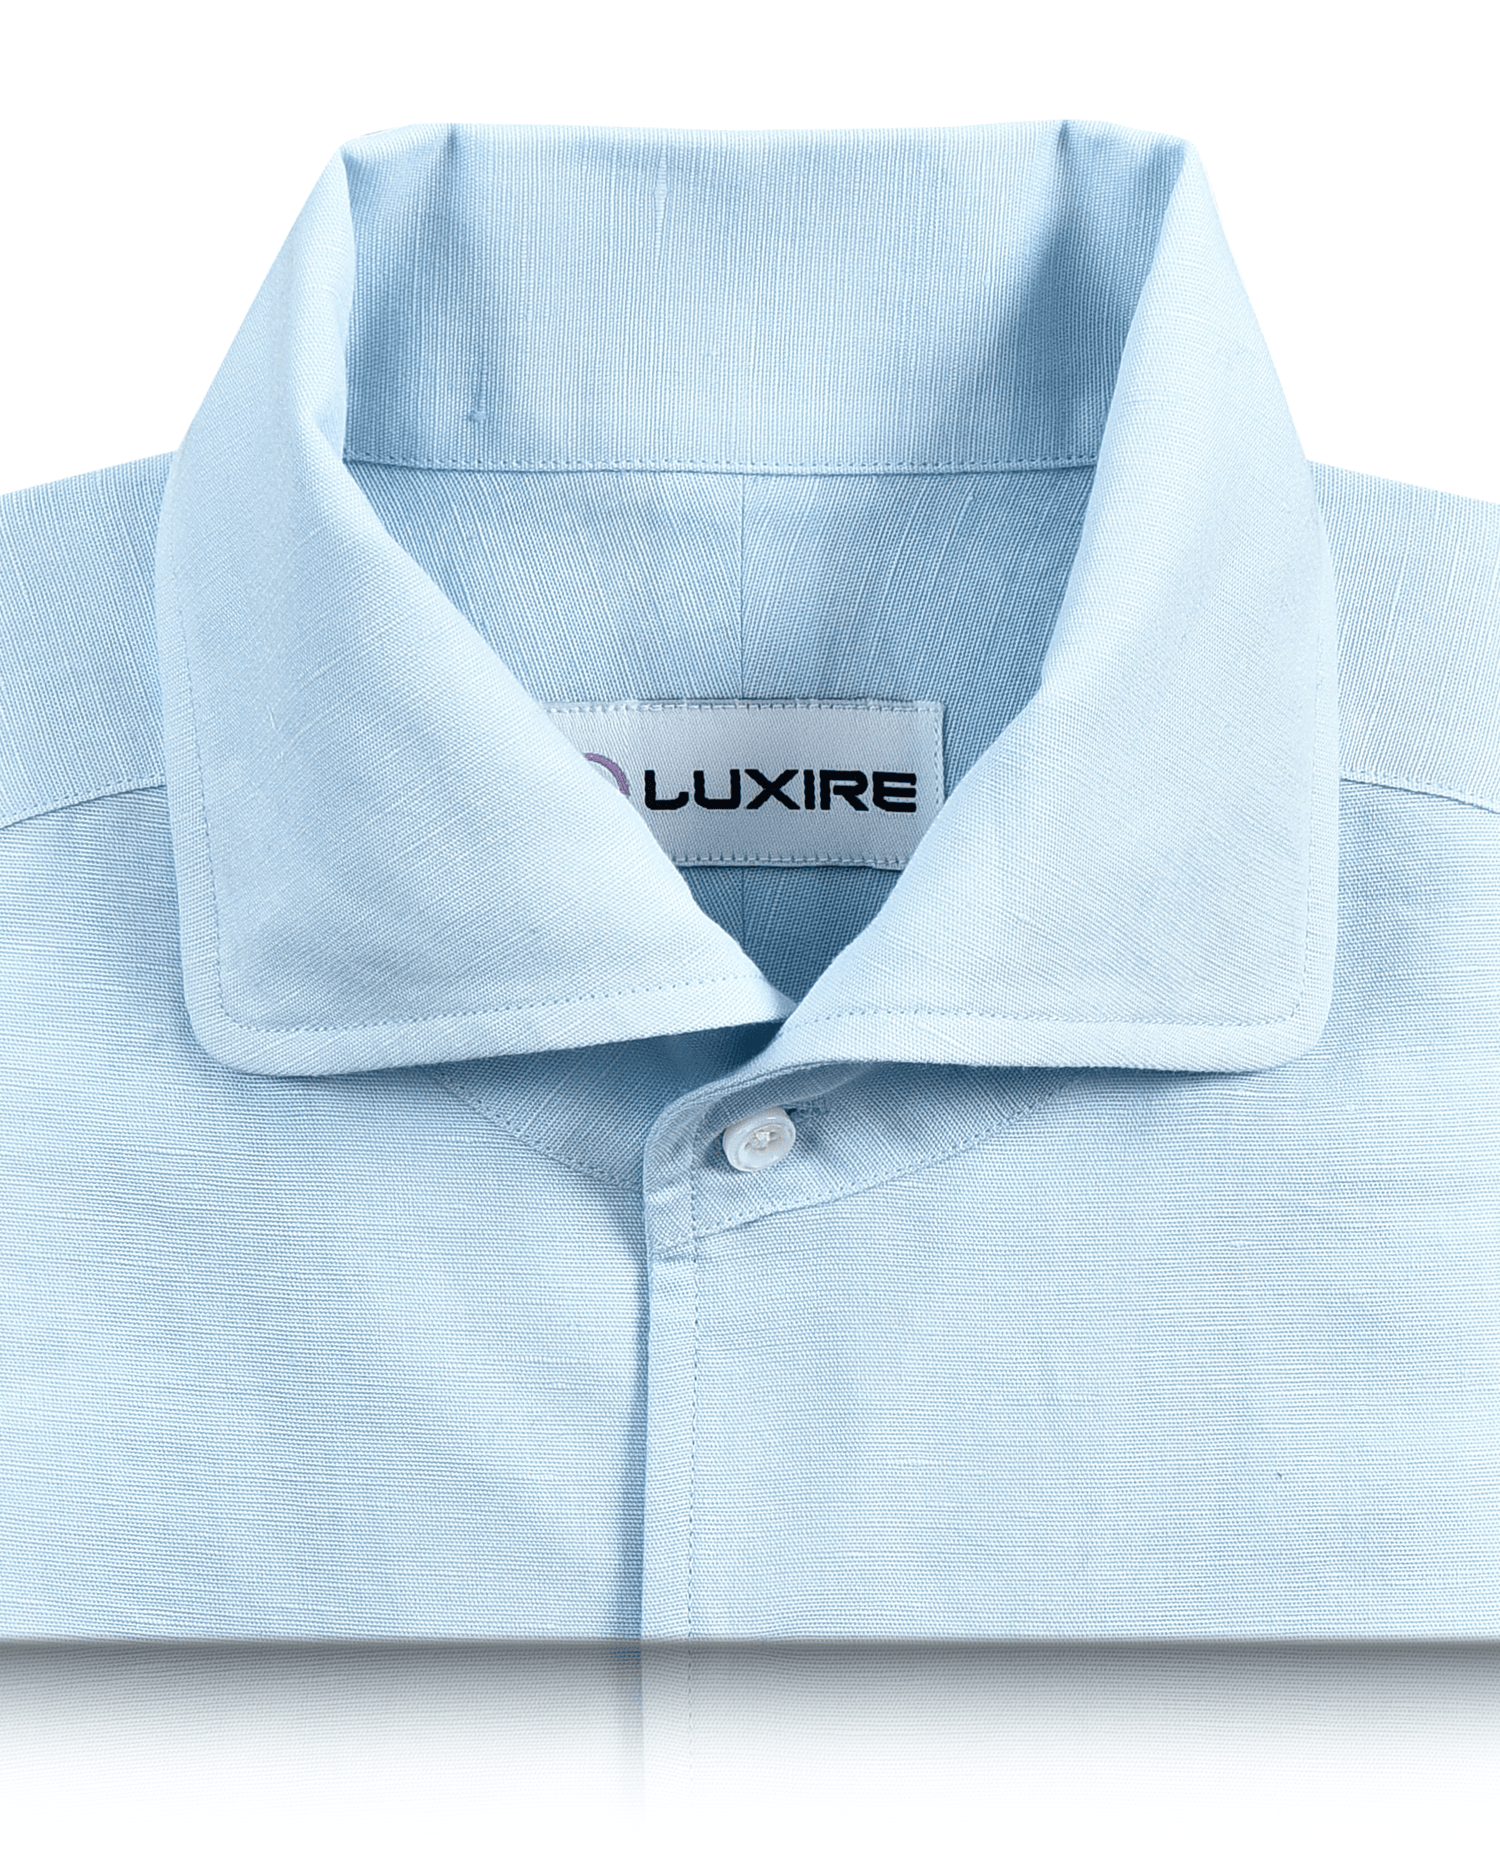 Collar of custom linen shirt for men in powder blue by Luxire Clothing